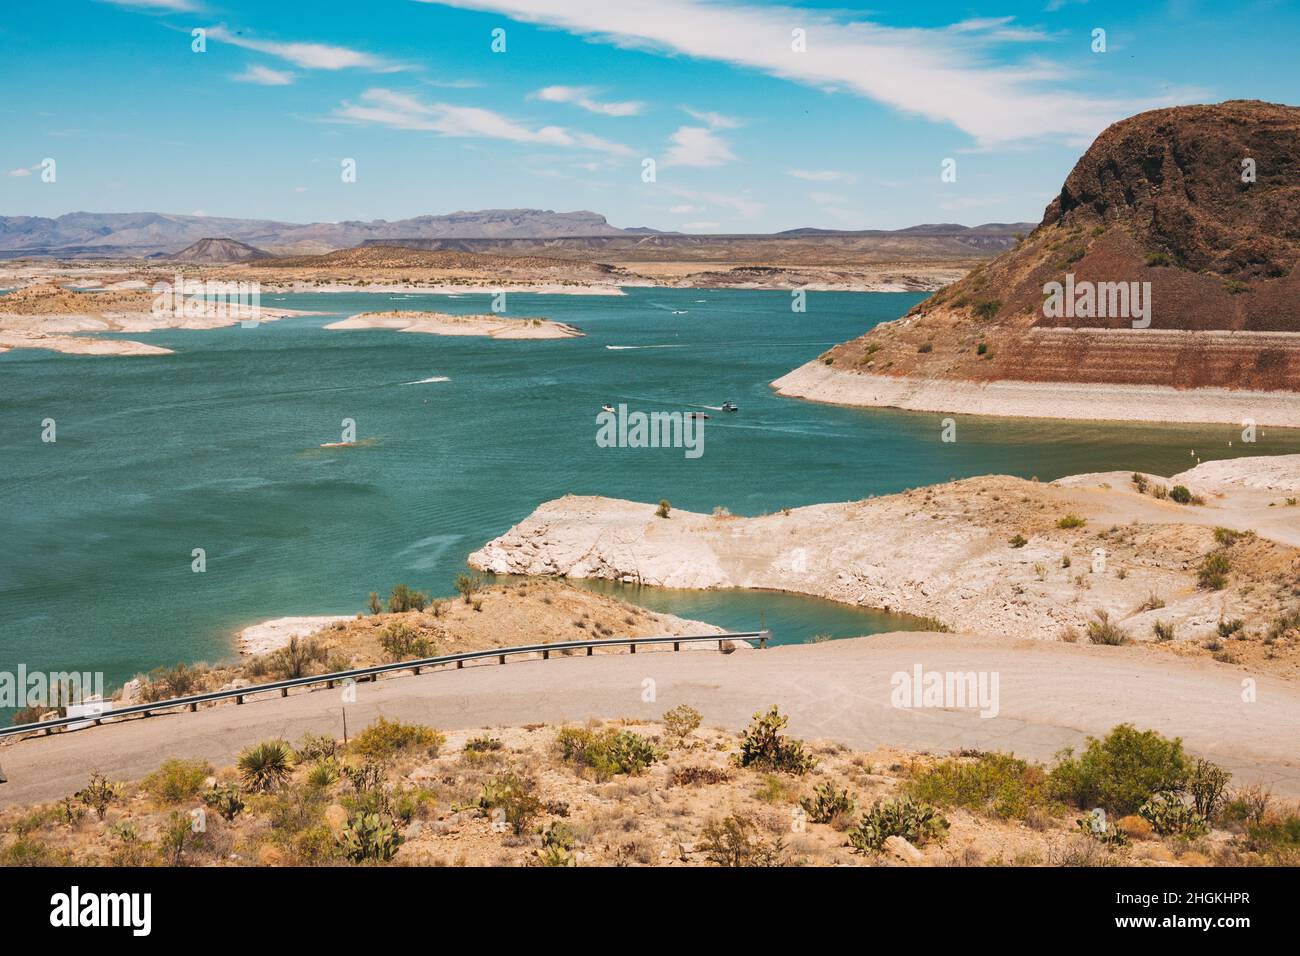 boats on the Elephant Butte Reservoir, a man-made lake created by the eponymous dam on the Rio Grande near Truth or Consequences, New Mexico, USA Stock Photo